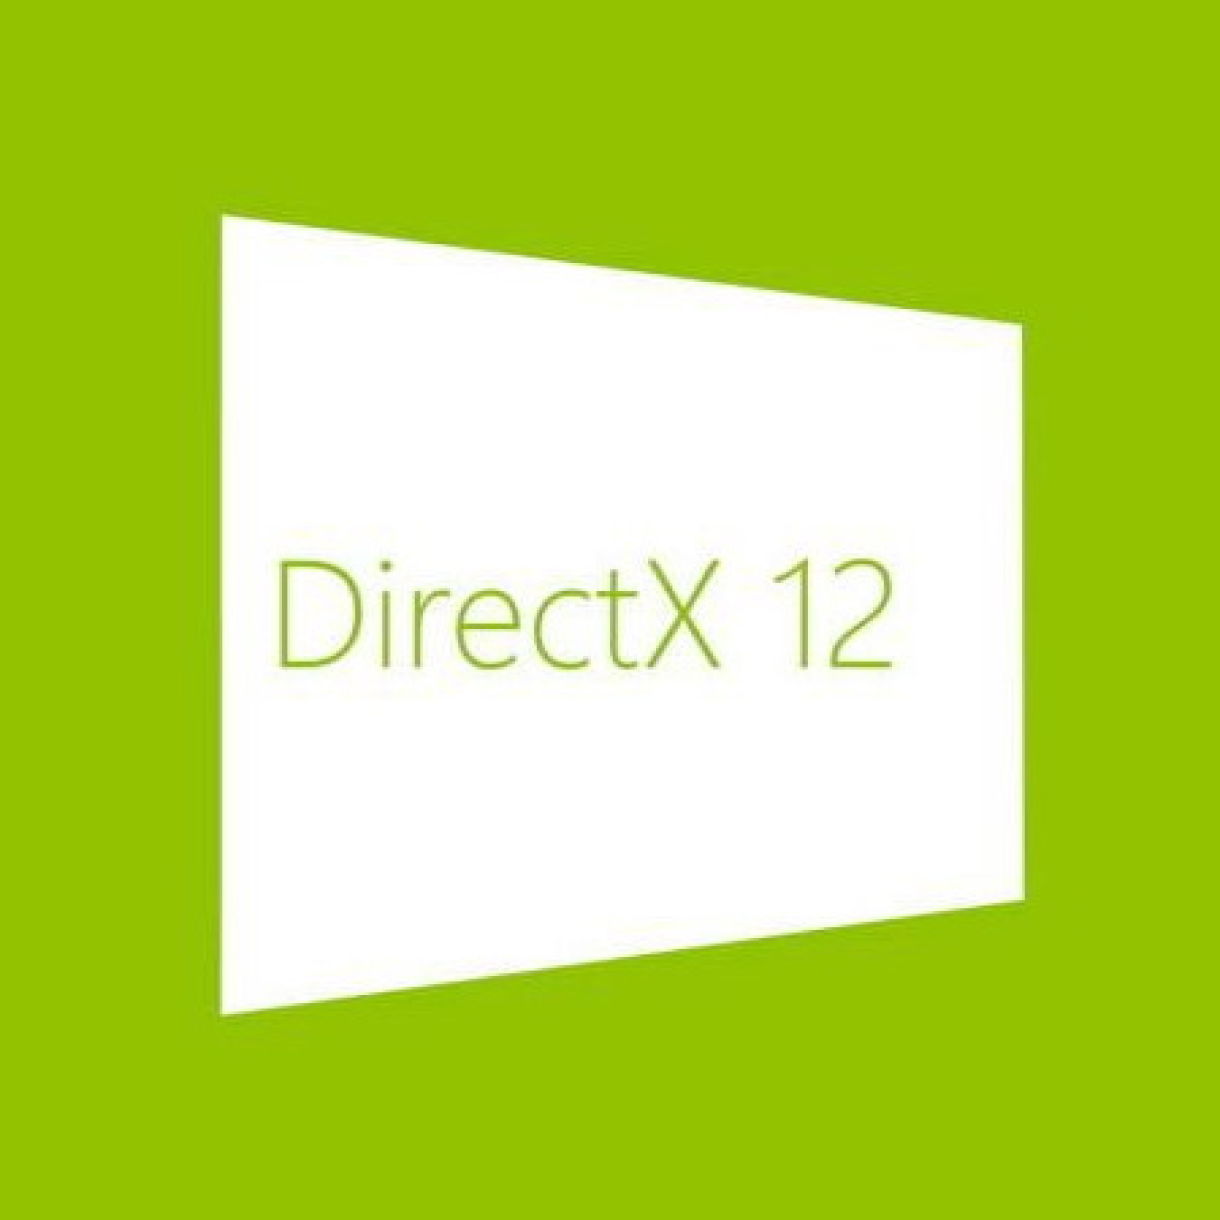 DirectX 12 on Xbox One now available with Unity 2018.3